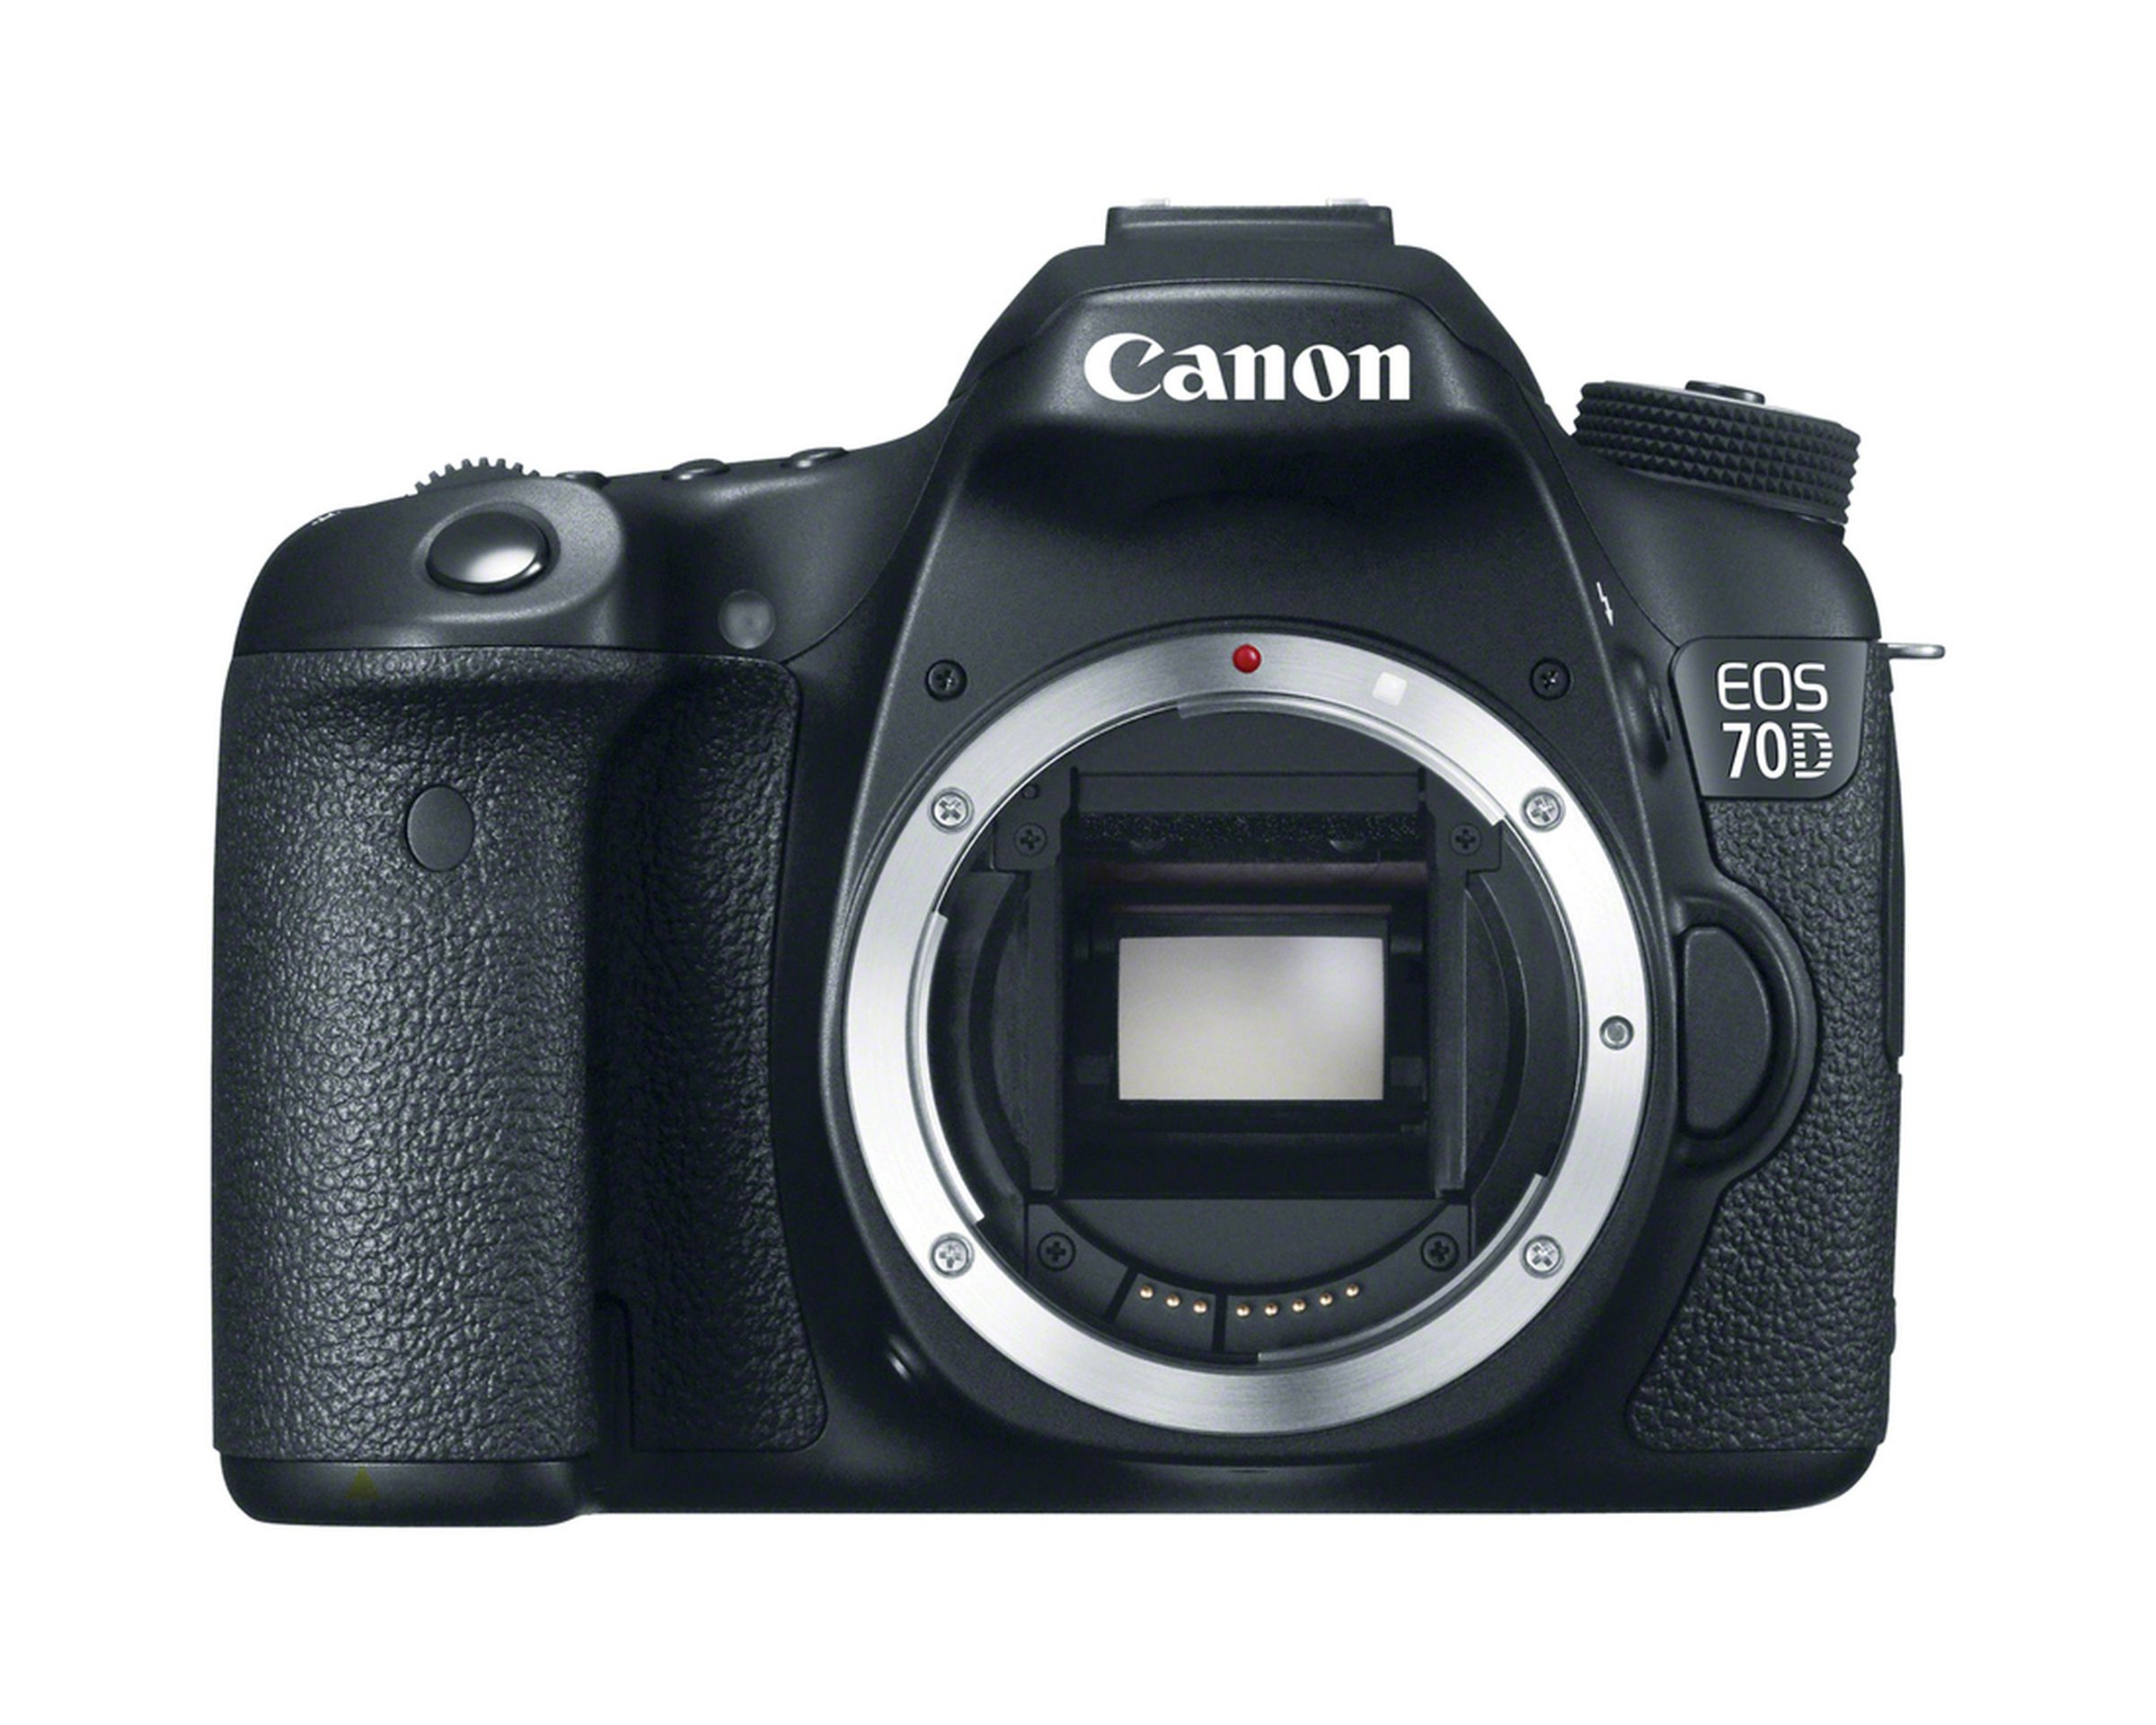 Canon EOS 70D gallery and press images